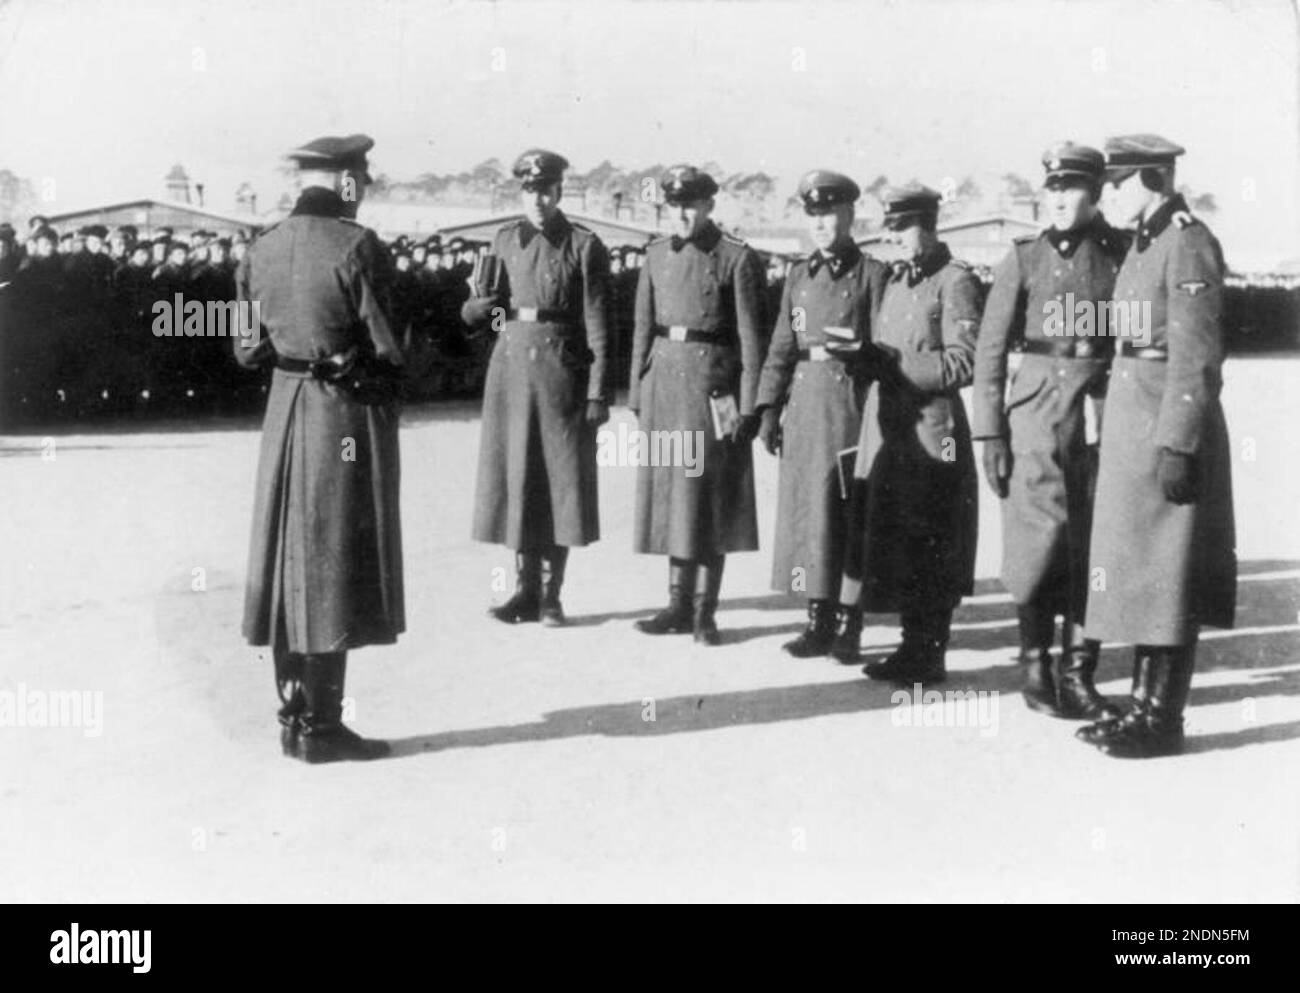 Members of the Totenkopf camp guards unit at Sachsenhausen concentration camp. The prisoners can be seen lined up in the background. The Totenkopf guards unit were a separate unit within the SS and were responsible for the running of the concentration and extermination camps. They are distinguished by the death's head emblem on their lapel. The 3rd SS Panzer division carried the name Totenkopf but were a fighting unit not involved in the administration of the camps. By Bundesarchiv, Bild 183-78612-0010 / CC-BY-SA 3.0, CC BY-SA 3.0 de, https://commons.wikimedia.org/w/index.php?curid=5431255 Stock Photo